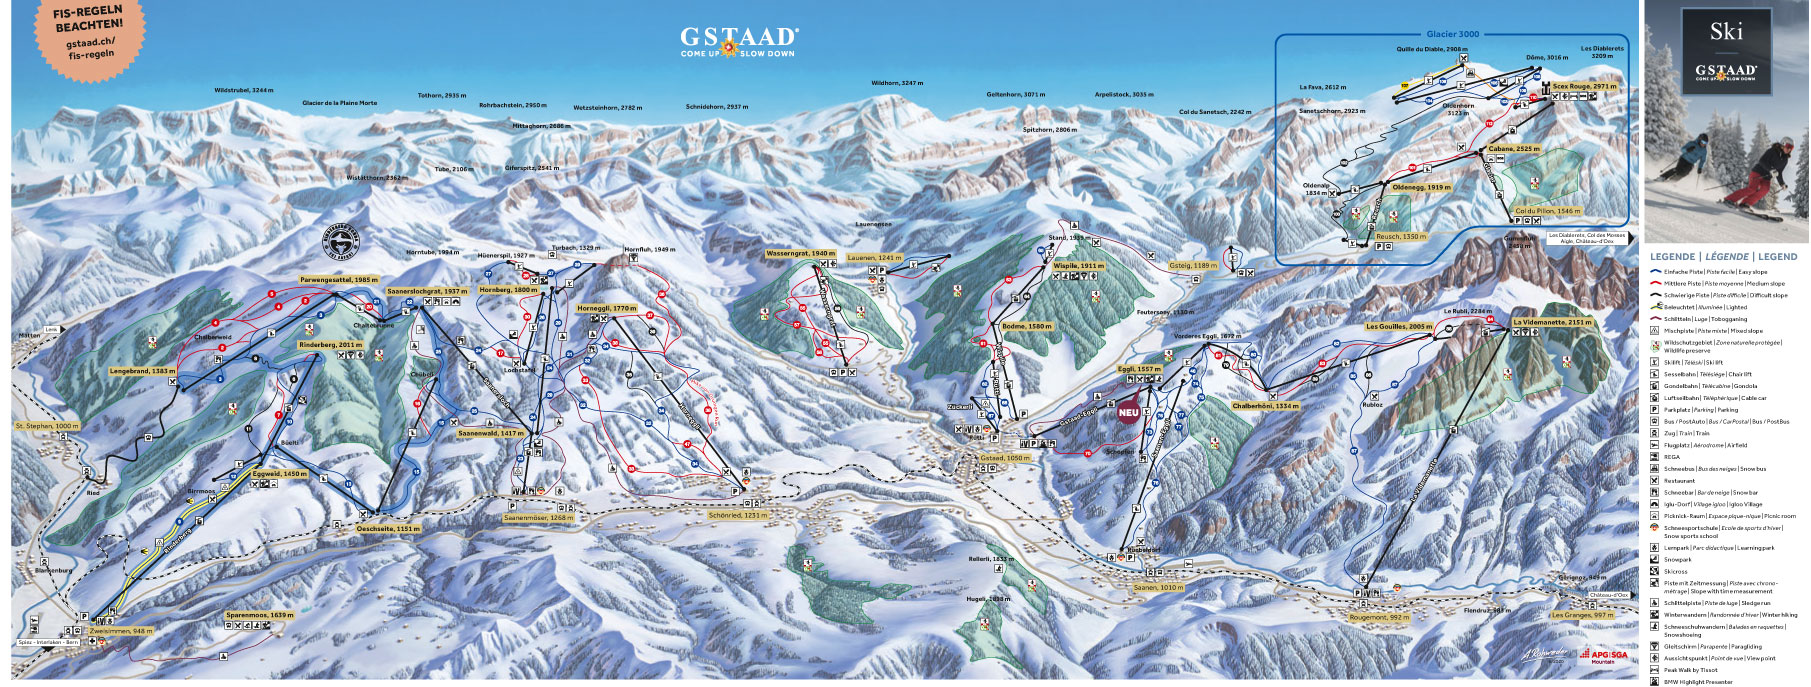 Gstaad ski map